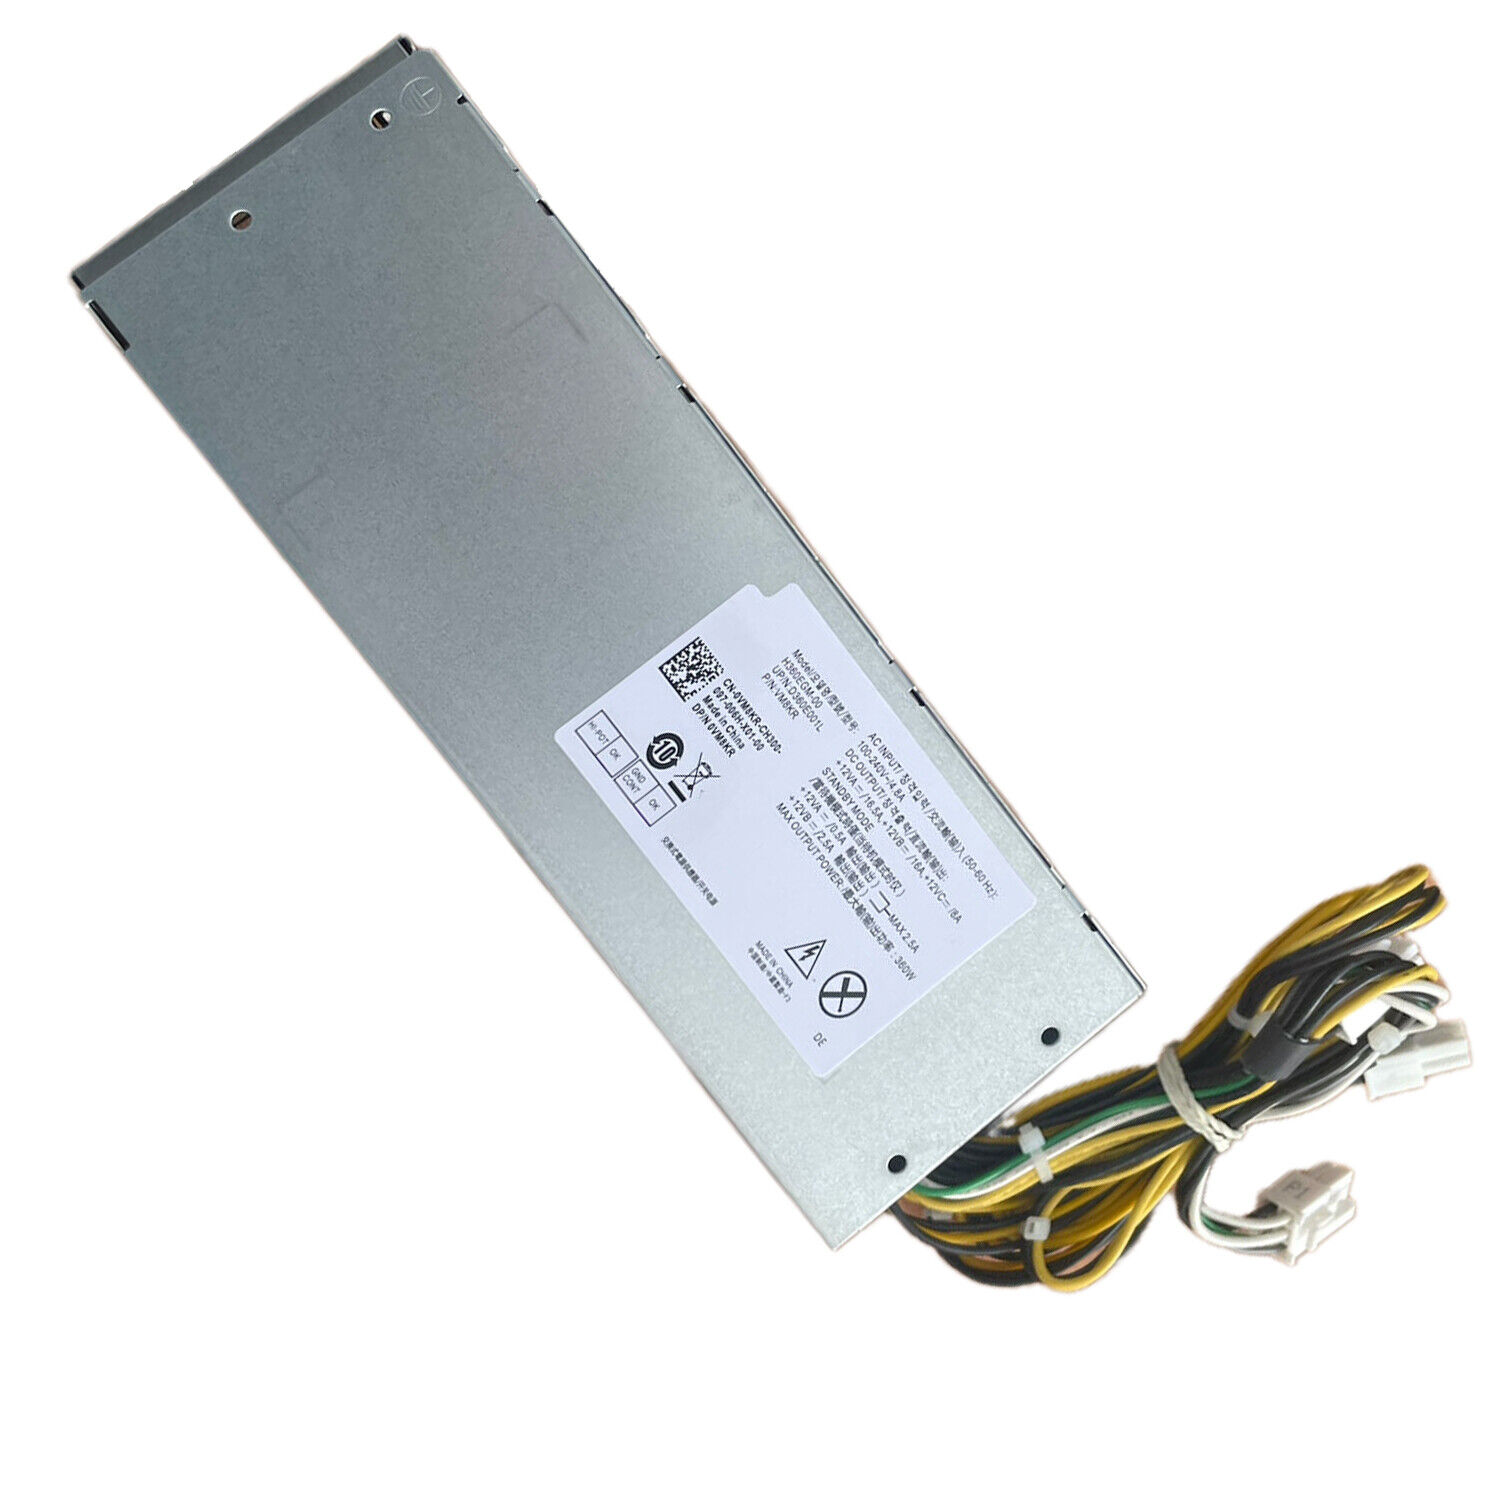 New 360W H360EBM-00 Switching Power Supply FIT For Dell G5 5090 XPS 8940 US